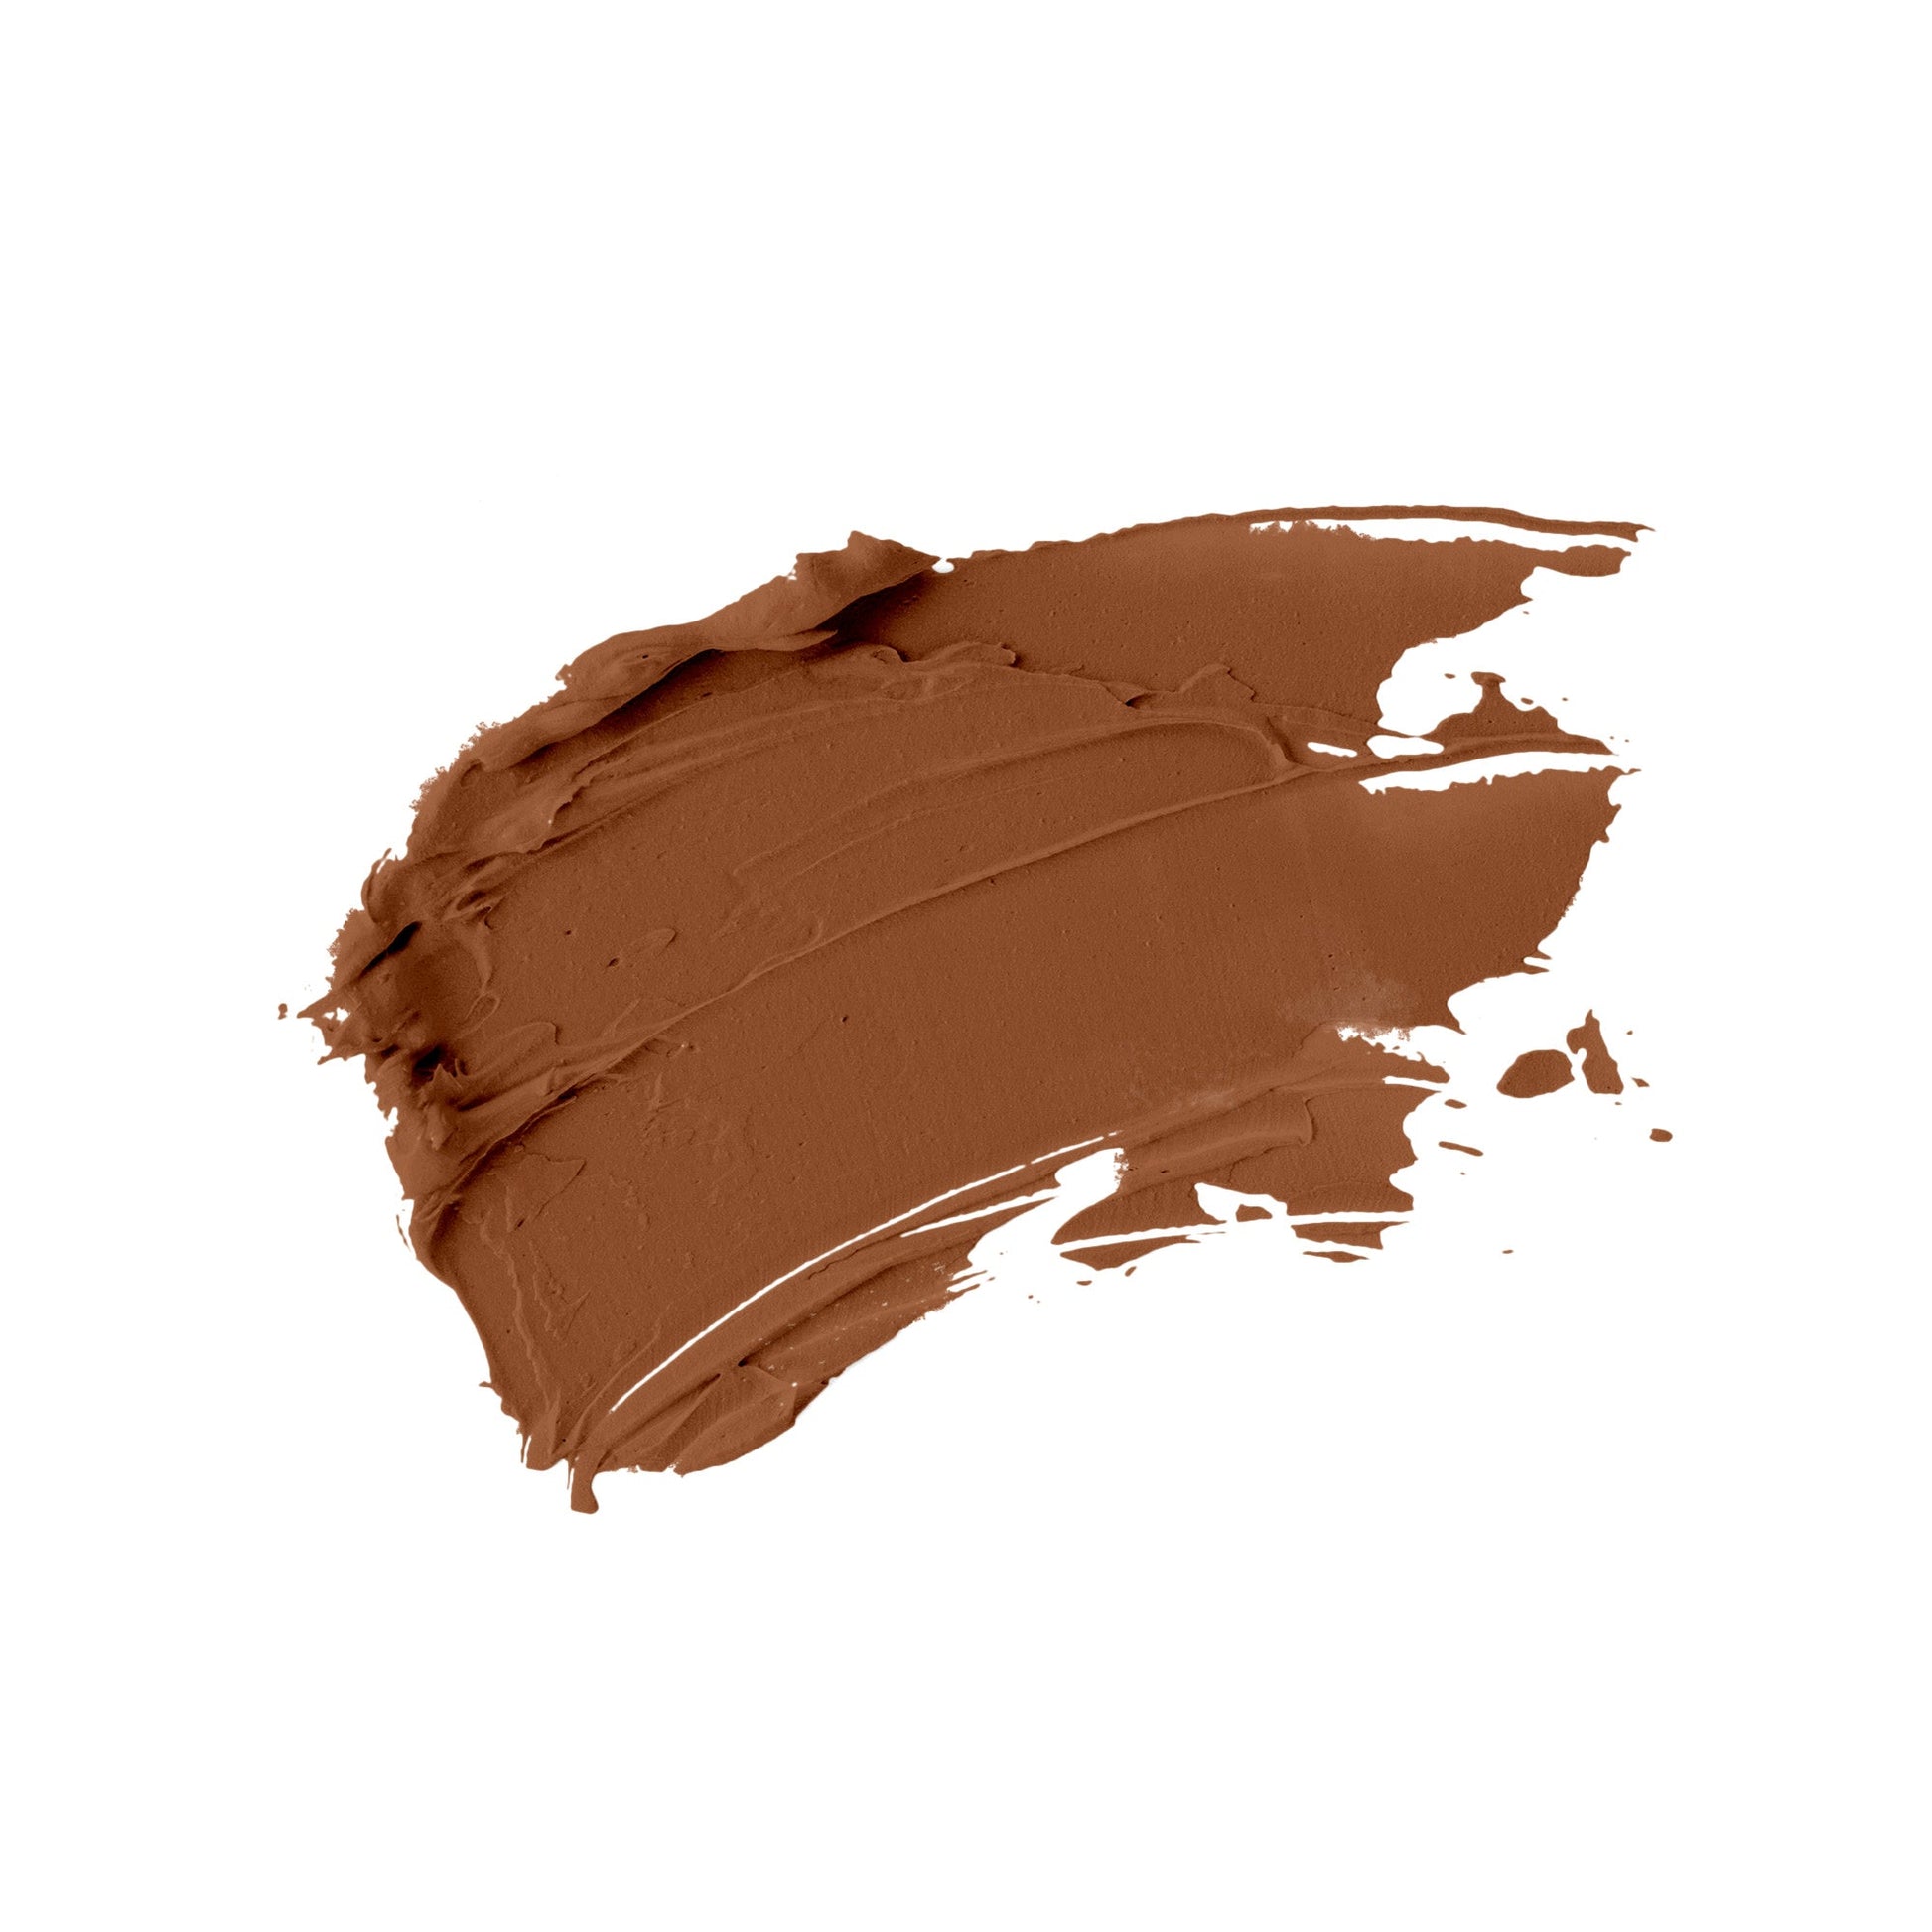 Swatch of coffee bean tone of an oil free natural non-toxic liquid foundation